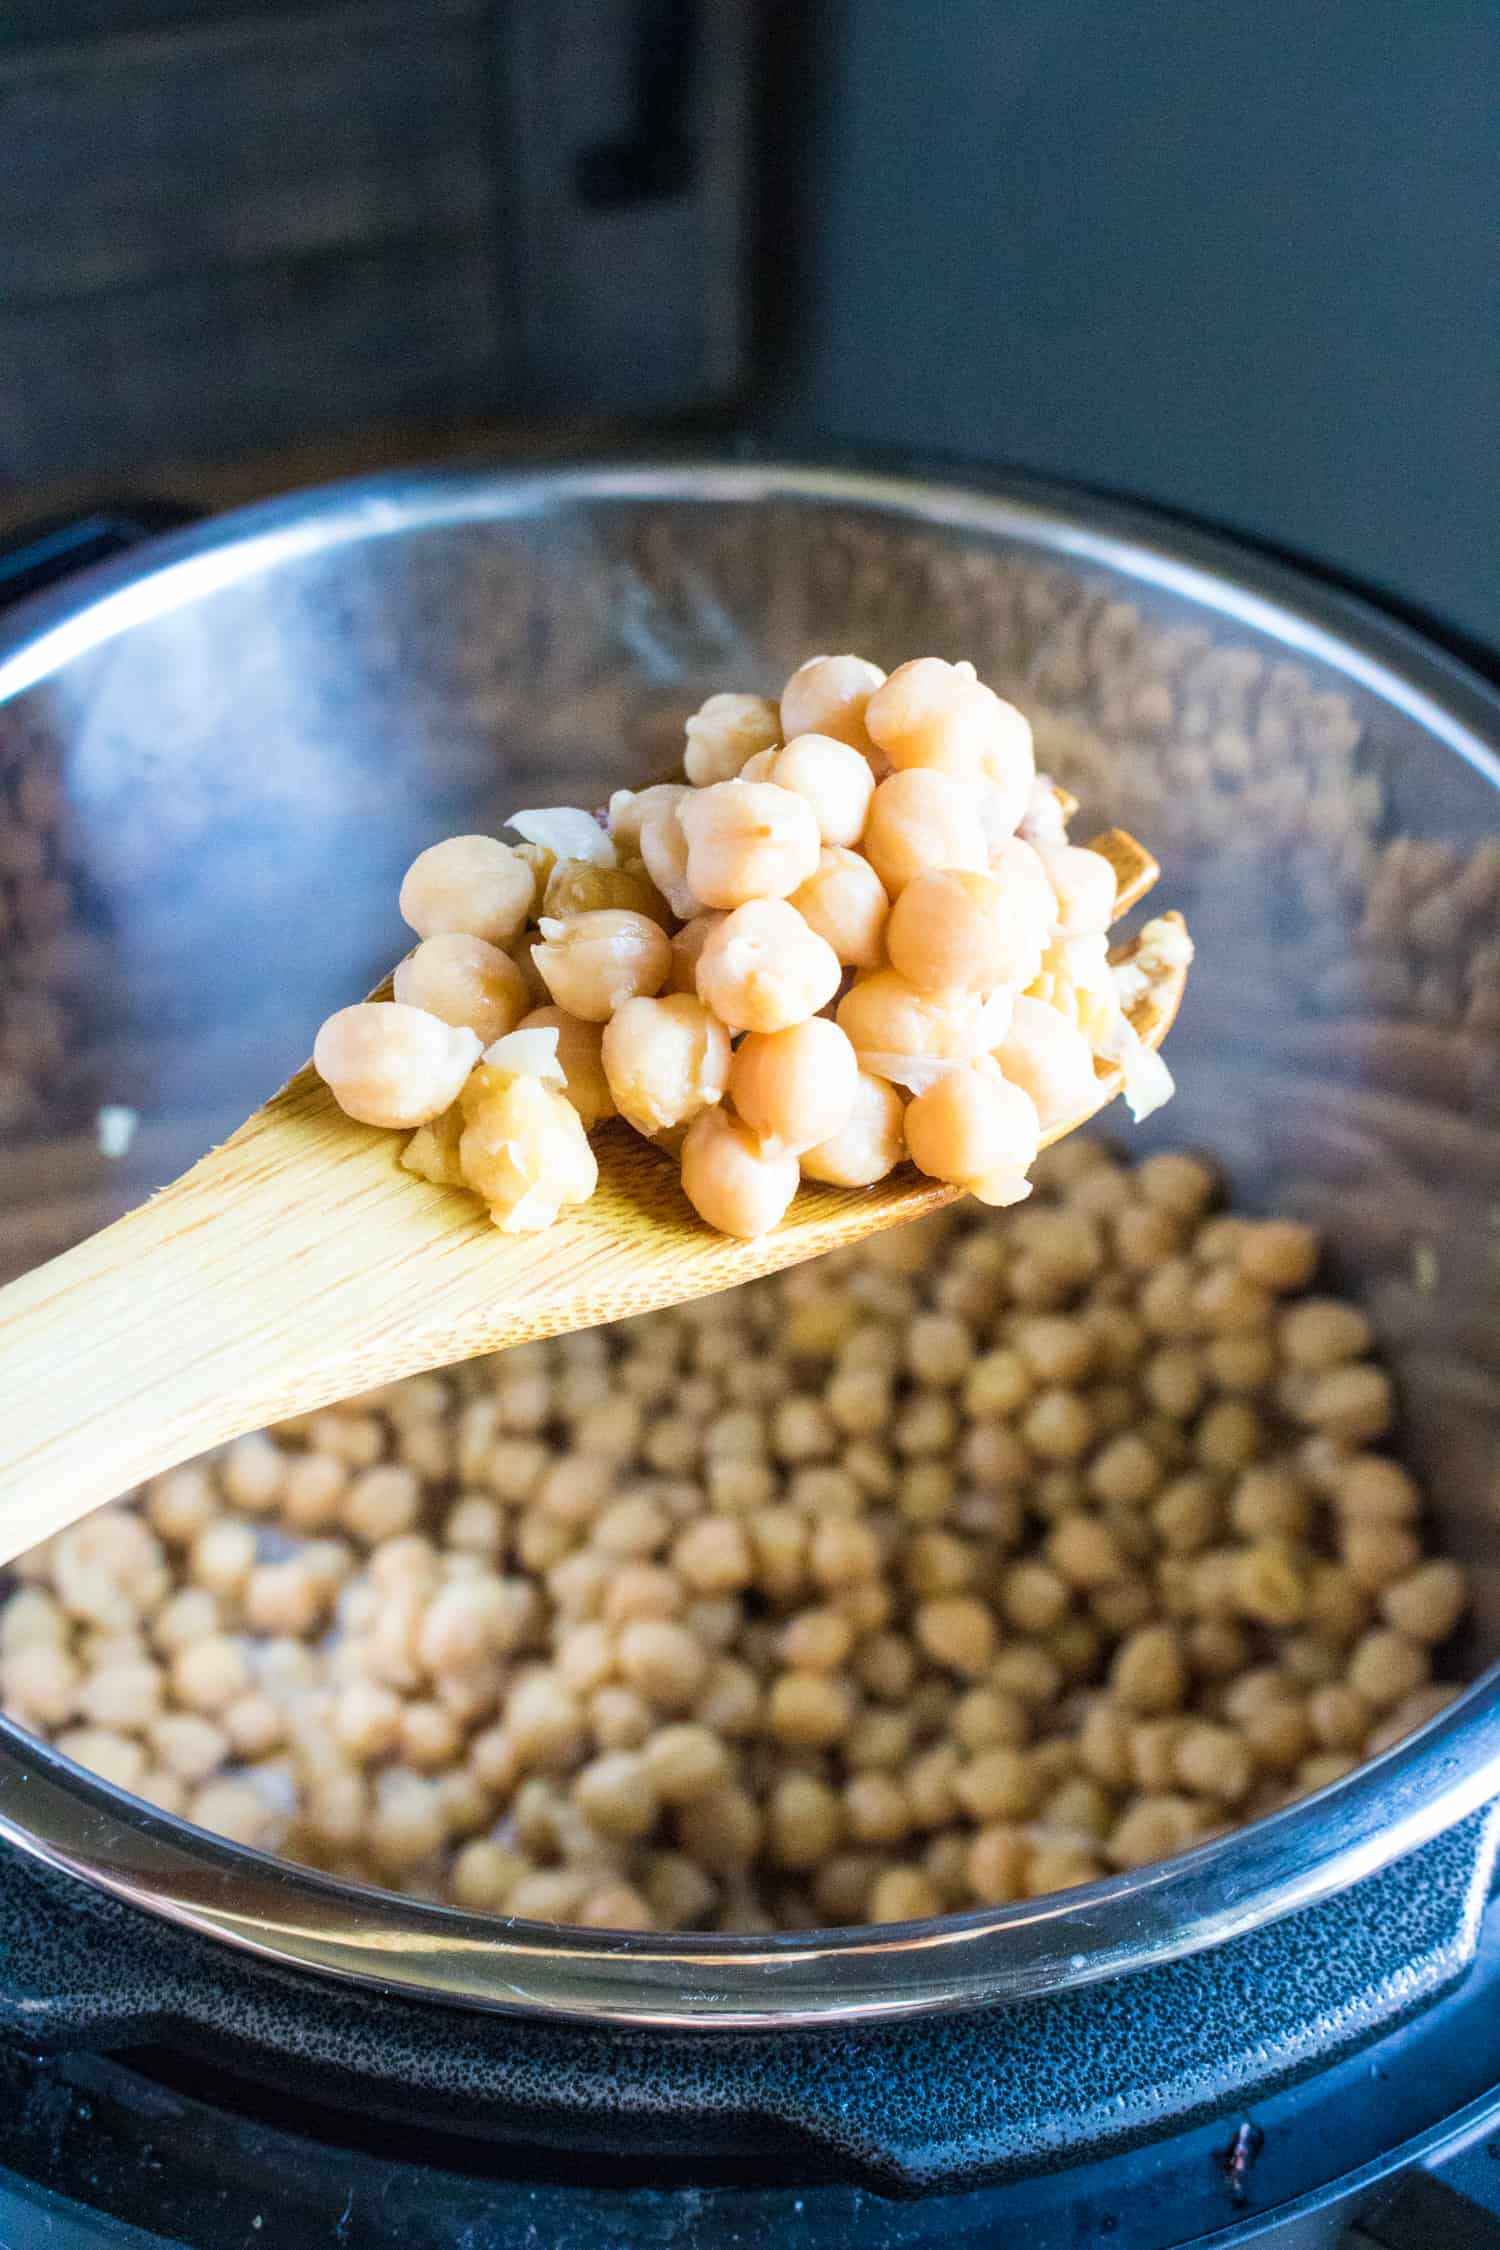 wooden spoon showing cooked chick peas for Roasted Red Pepper Hummus with instant pot in background full of chick peas